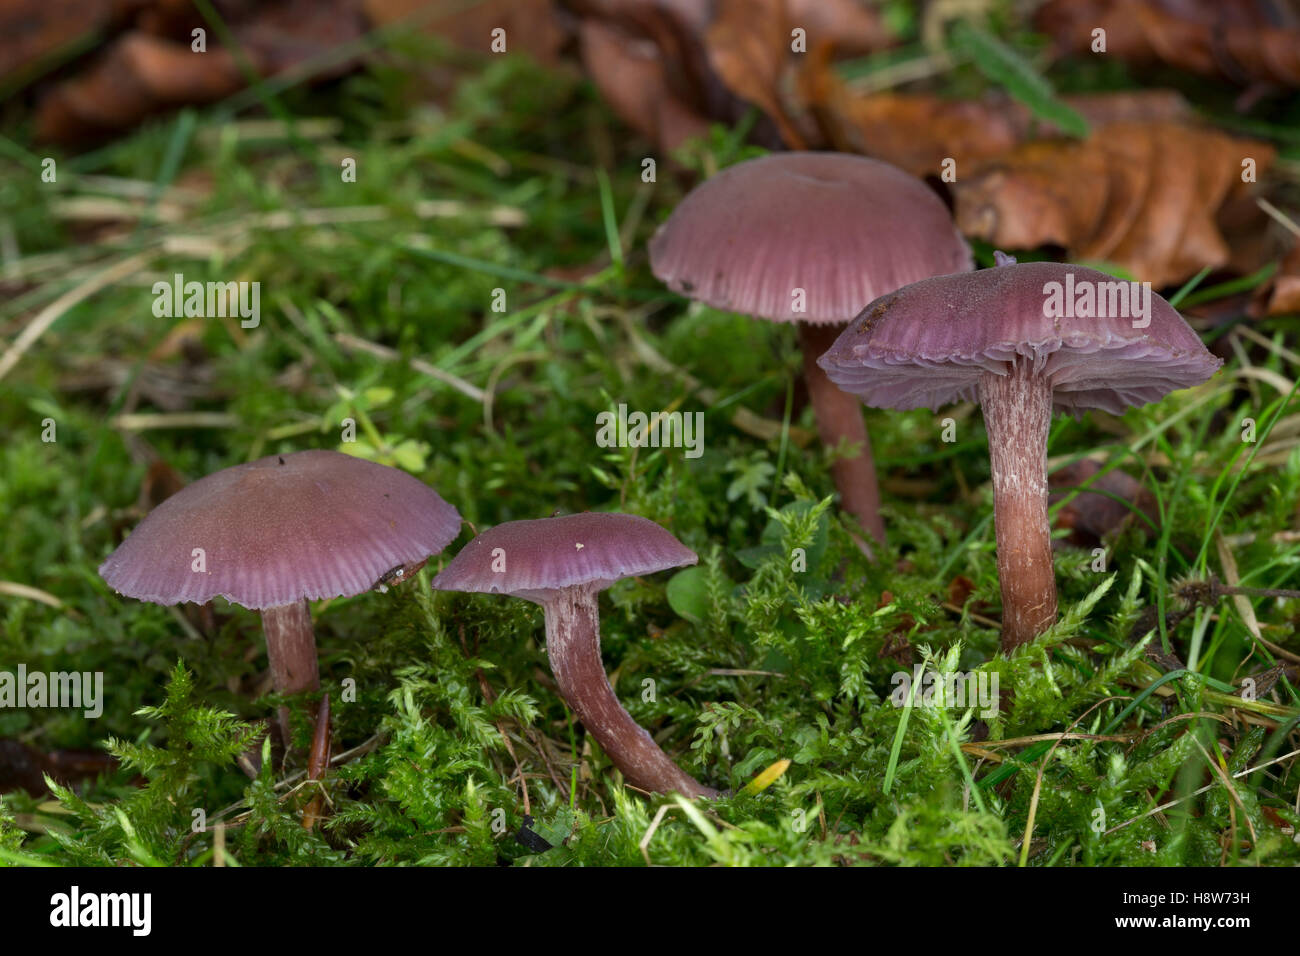 Violetter Lacktrichterling, Amethystblauer Lacktrichterling, Violetter Bläuling, Bläuling, Lack-Bläuling, Laccaria amethystina, Stock Photo